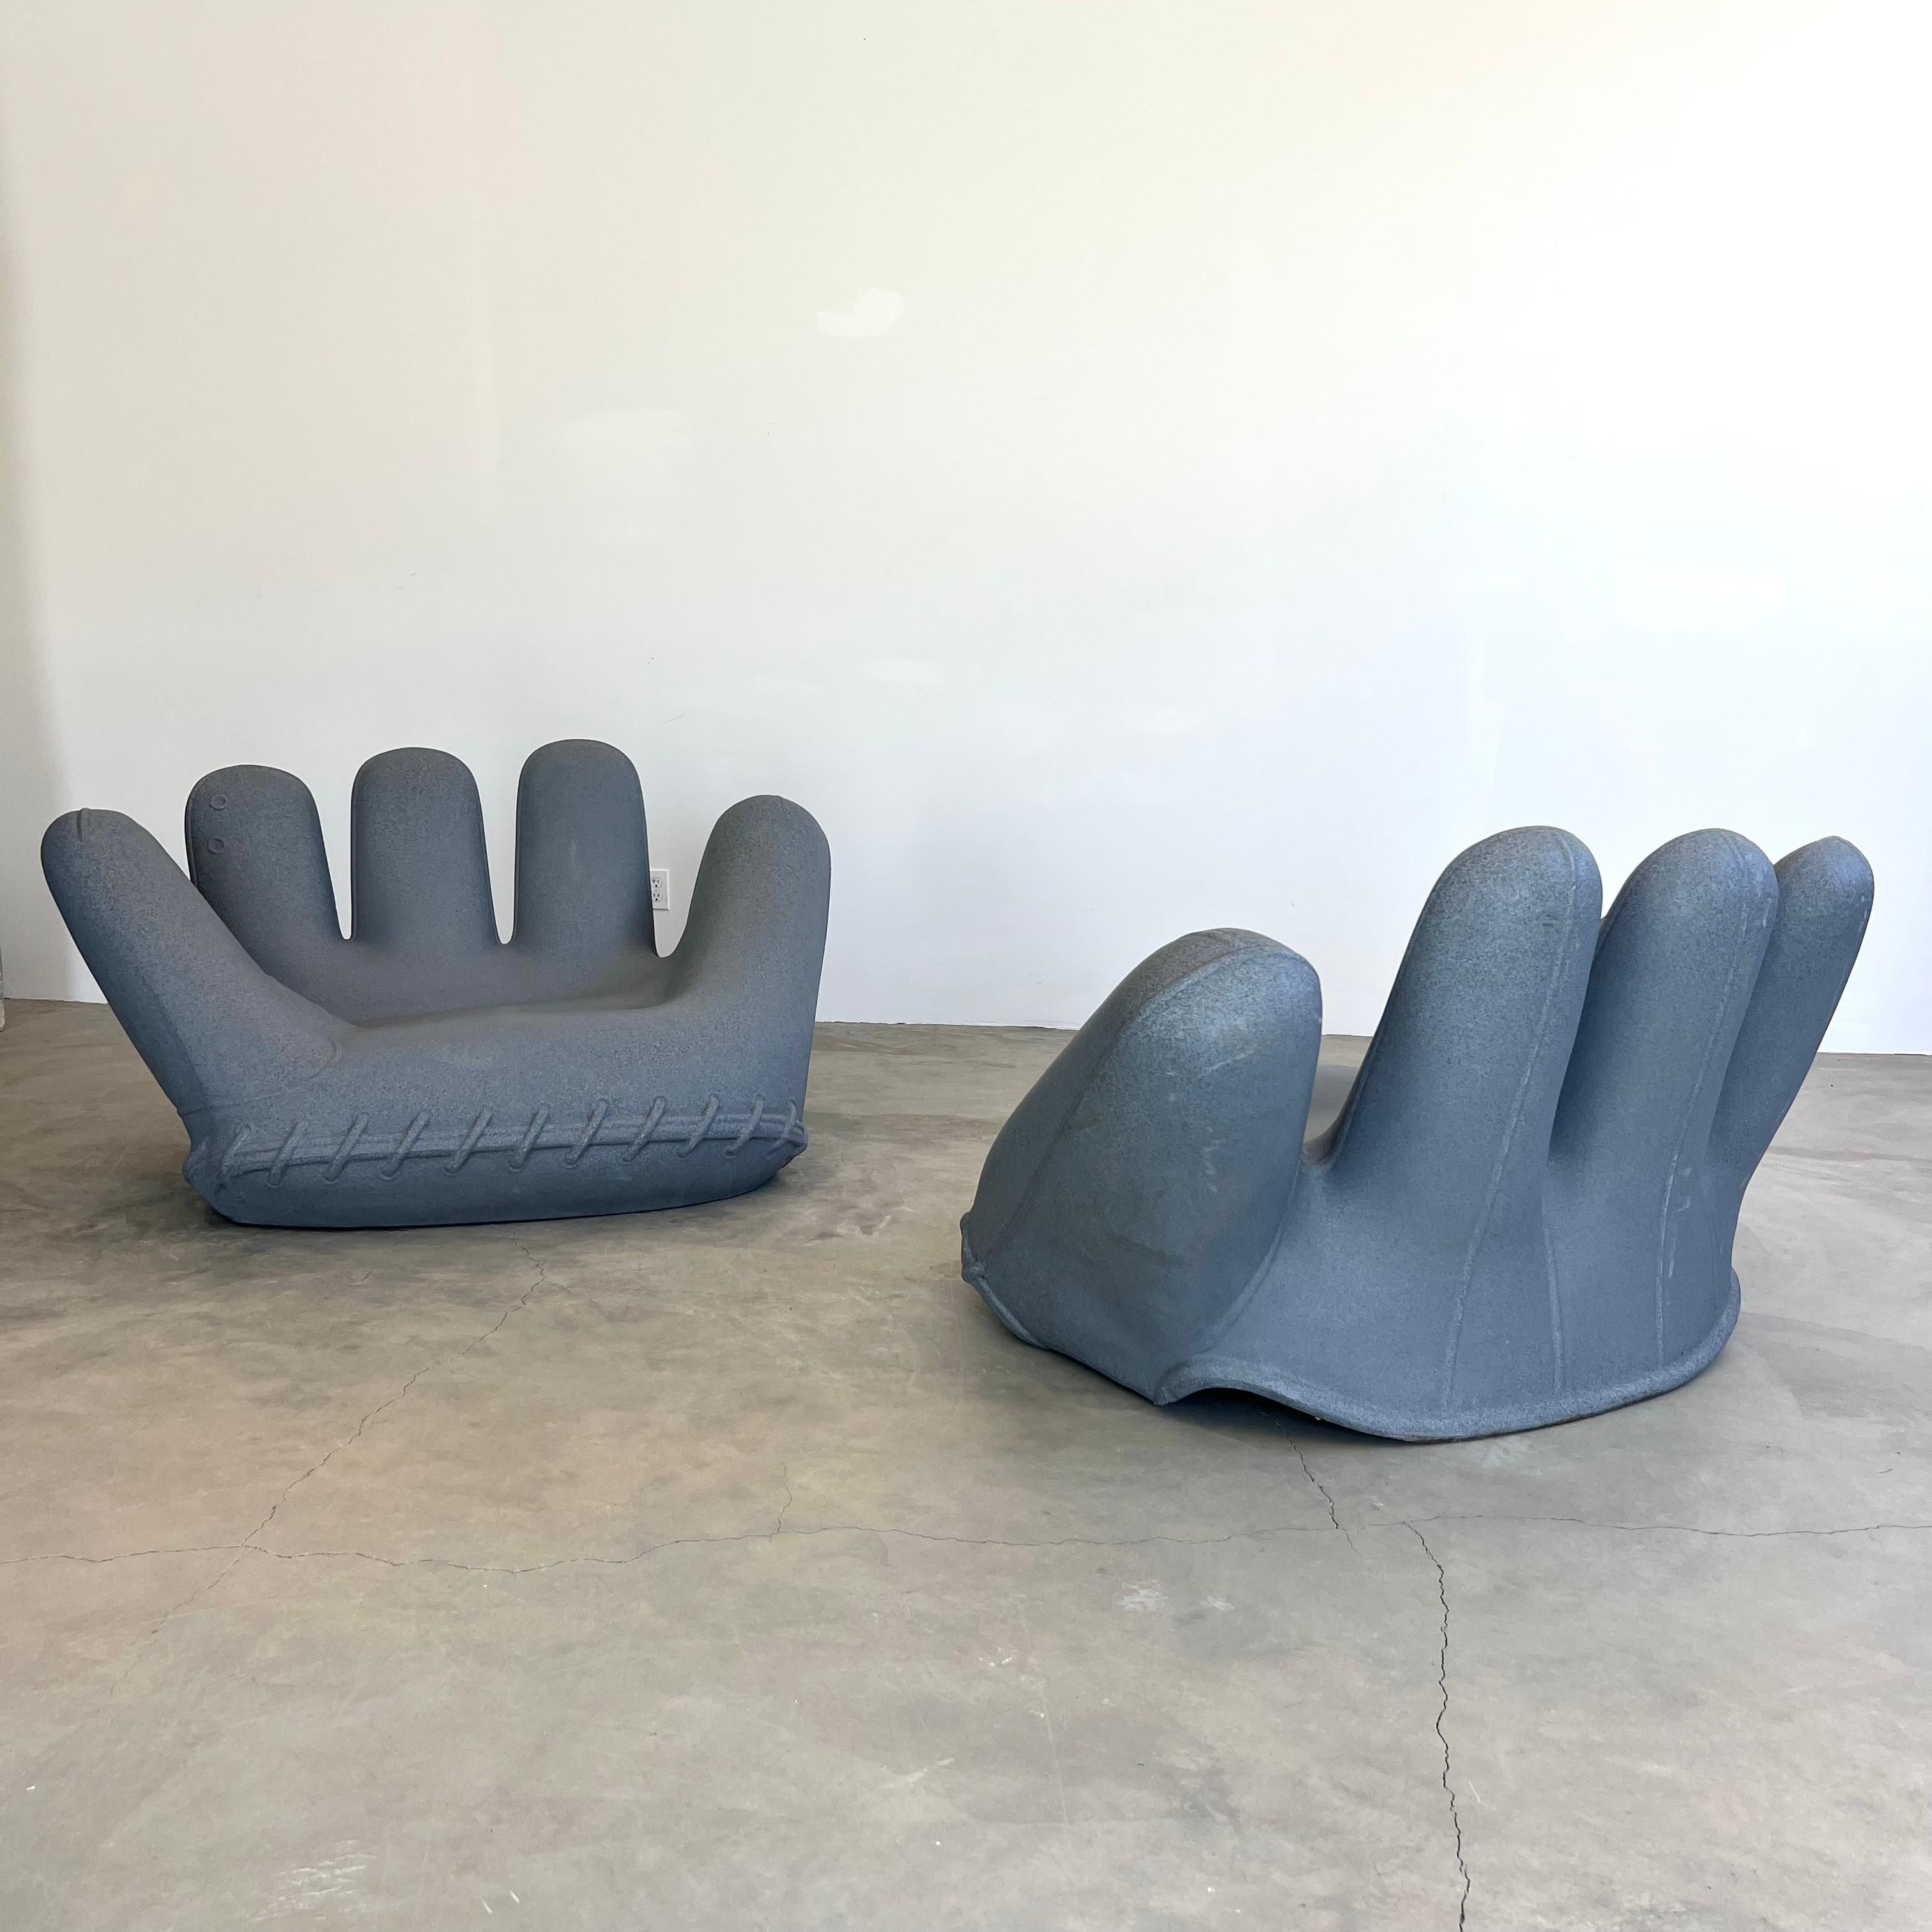 Monumental 'JOE' glove chair made for Heller. Originally designed by Jonathan De Pas, Donato D'Urbino and Paolo Lomazzi in the 1970's and made here in a thick plastic for outdoor use for Heller in 2003. Heller label and date underneath. Grey